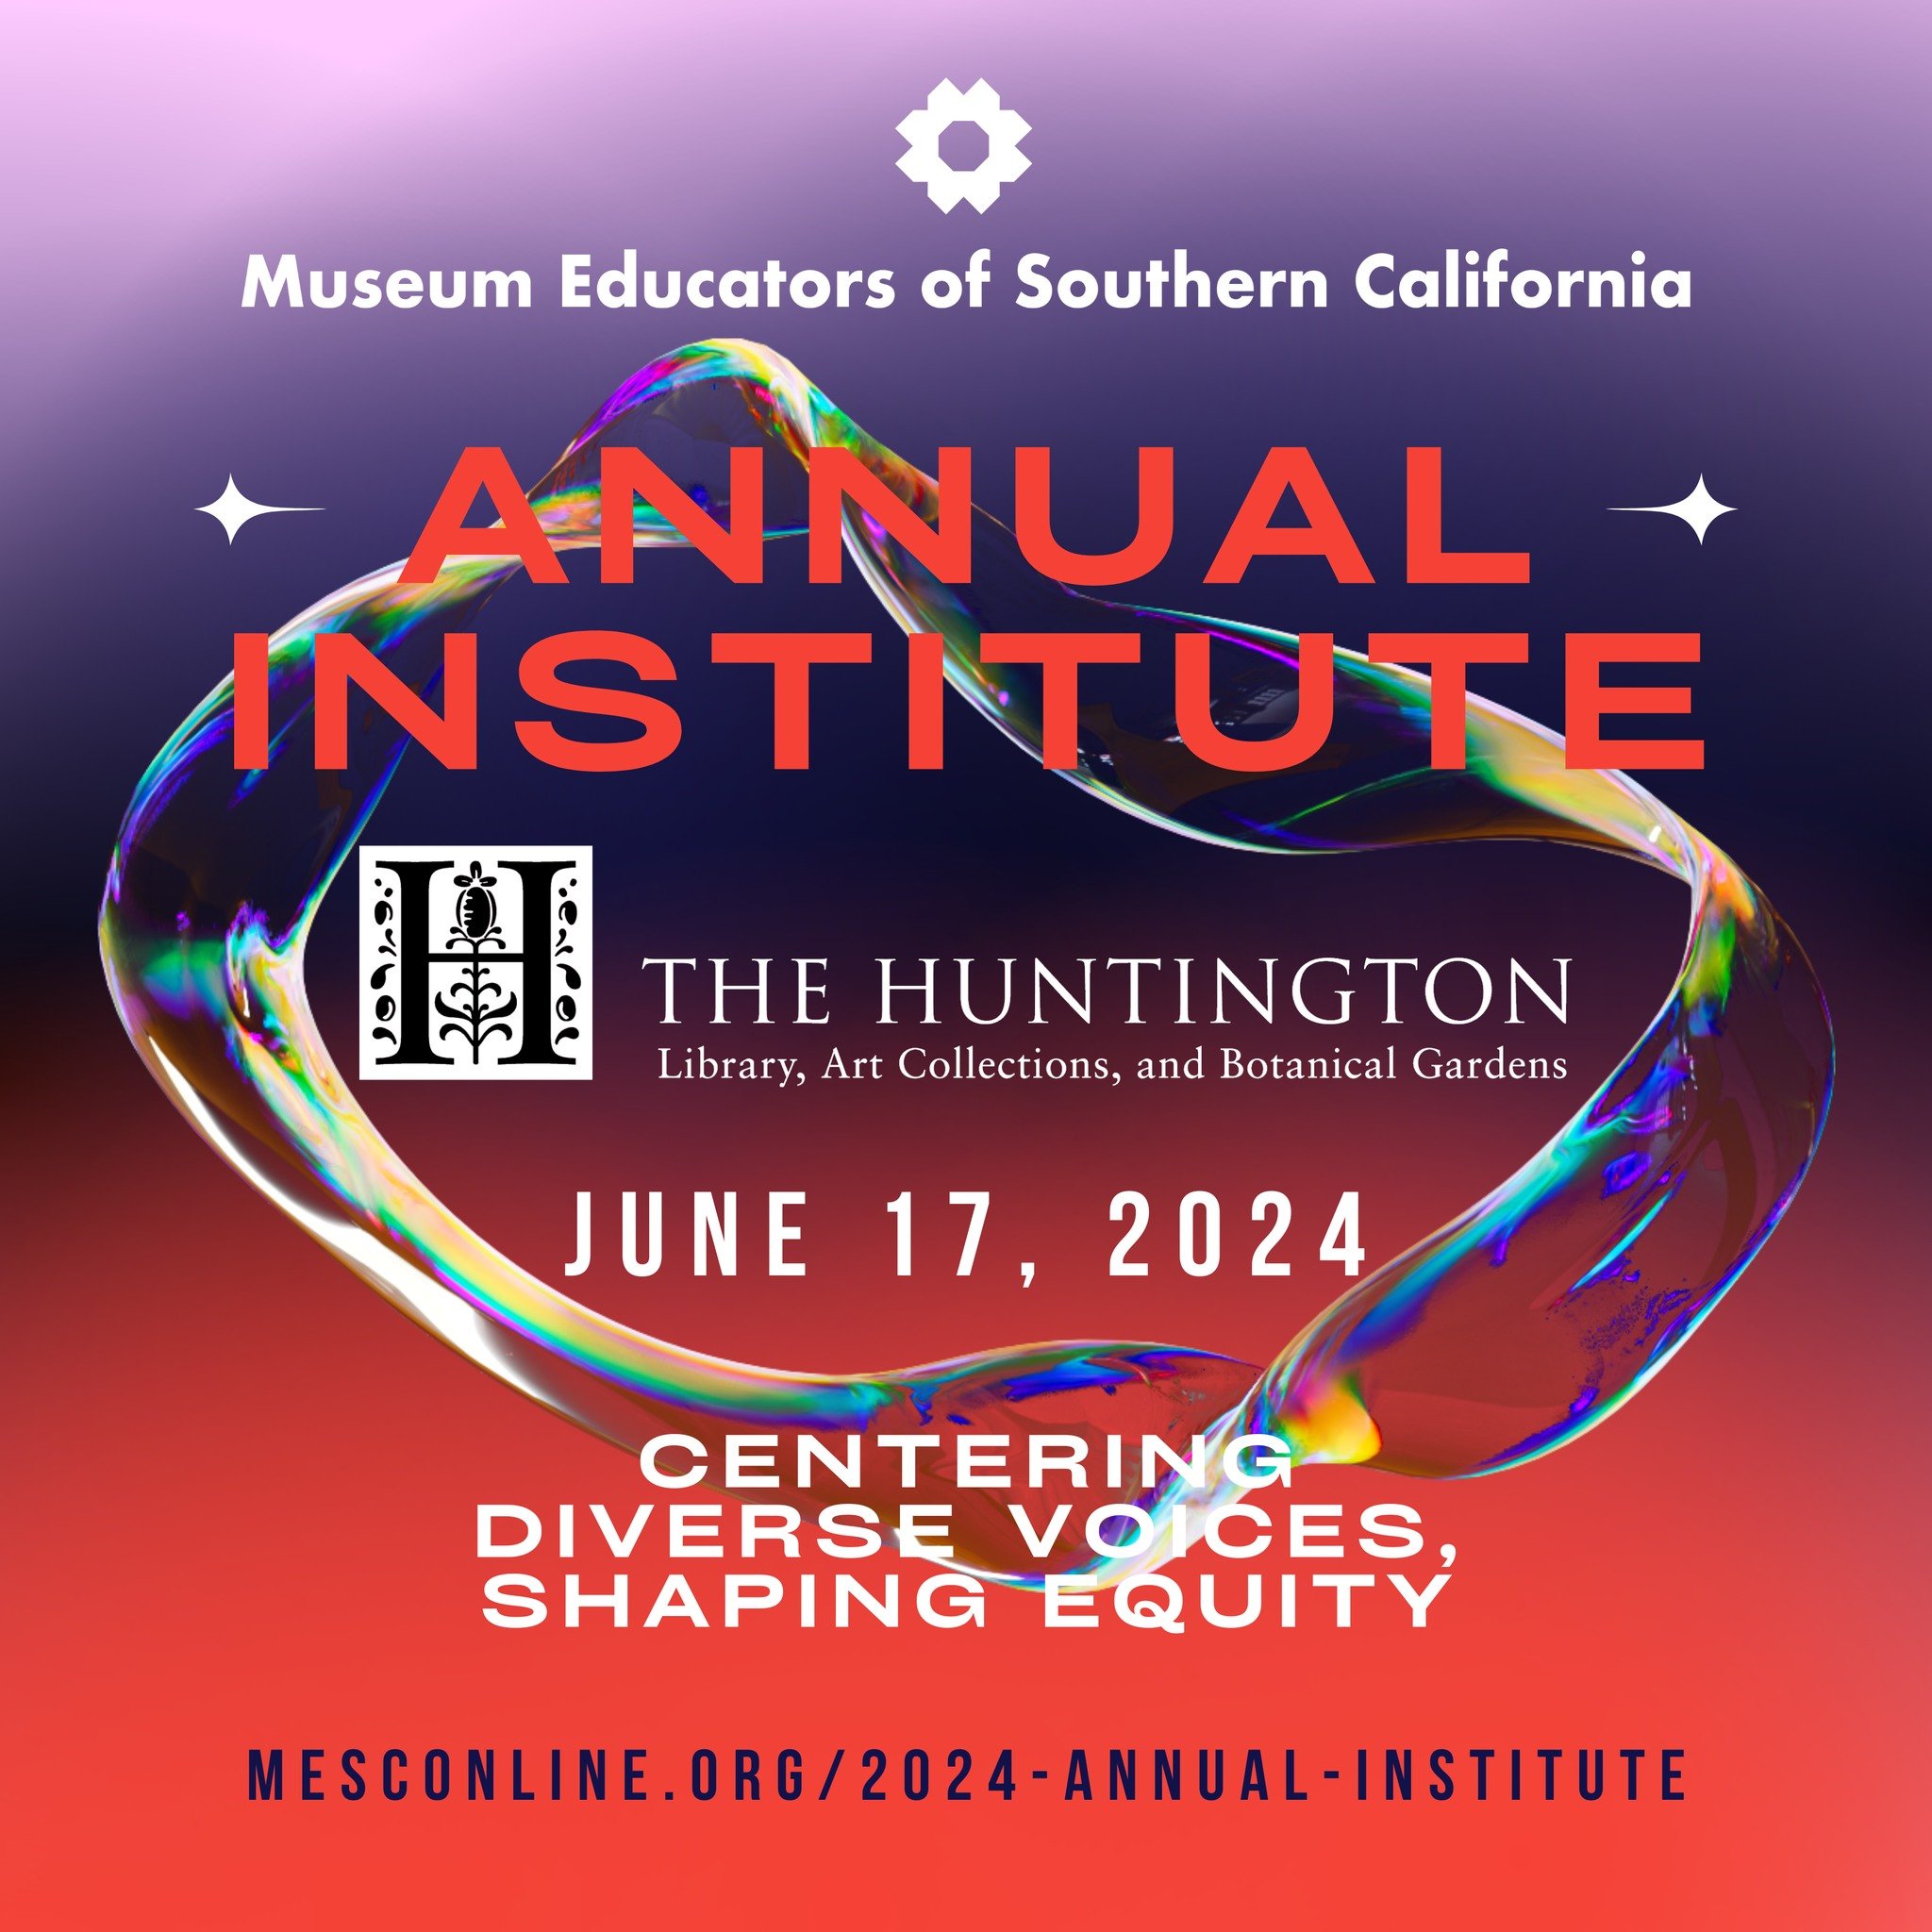 We are thrilled and honored to announce
that the 2024 Annual Institute will be held at the
prestigious @thehuntingtonlibrary! Join us at this iconic
venue, where world-class art, stunning gardens, and
groundbreaking research come together to create a